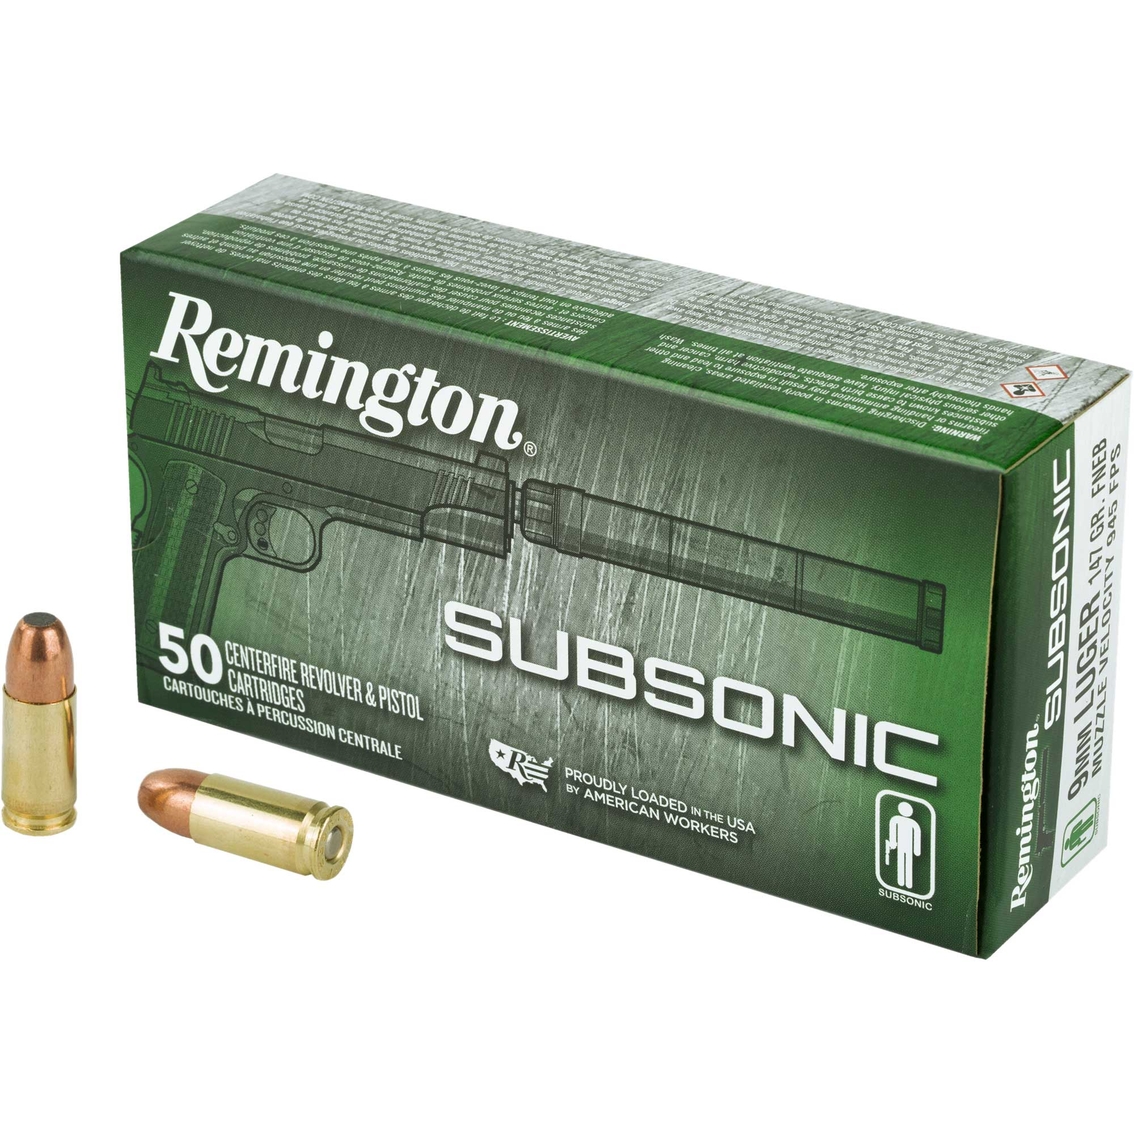 Remington Subsonic 9mm 147 Gr. Flat Nose Enclosed Bullet 50 Rounds ...